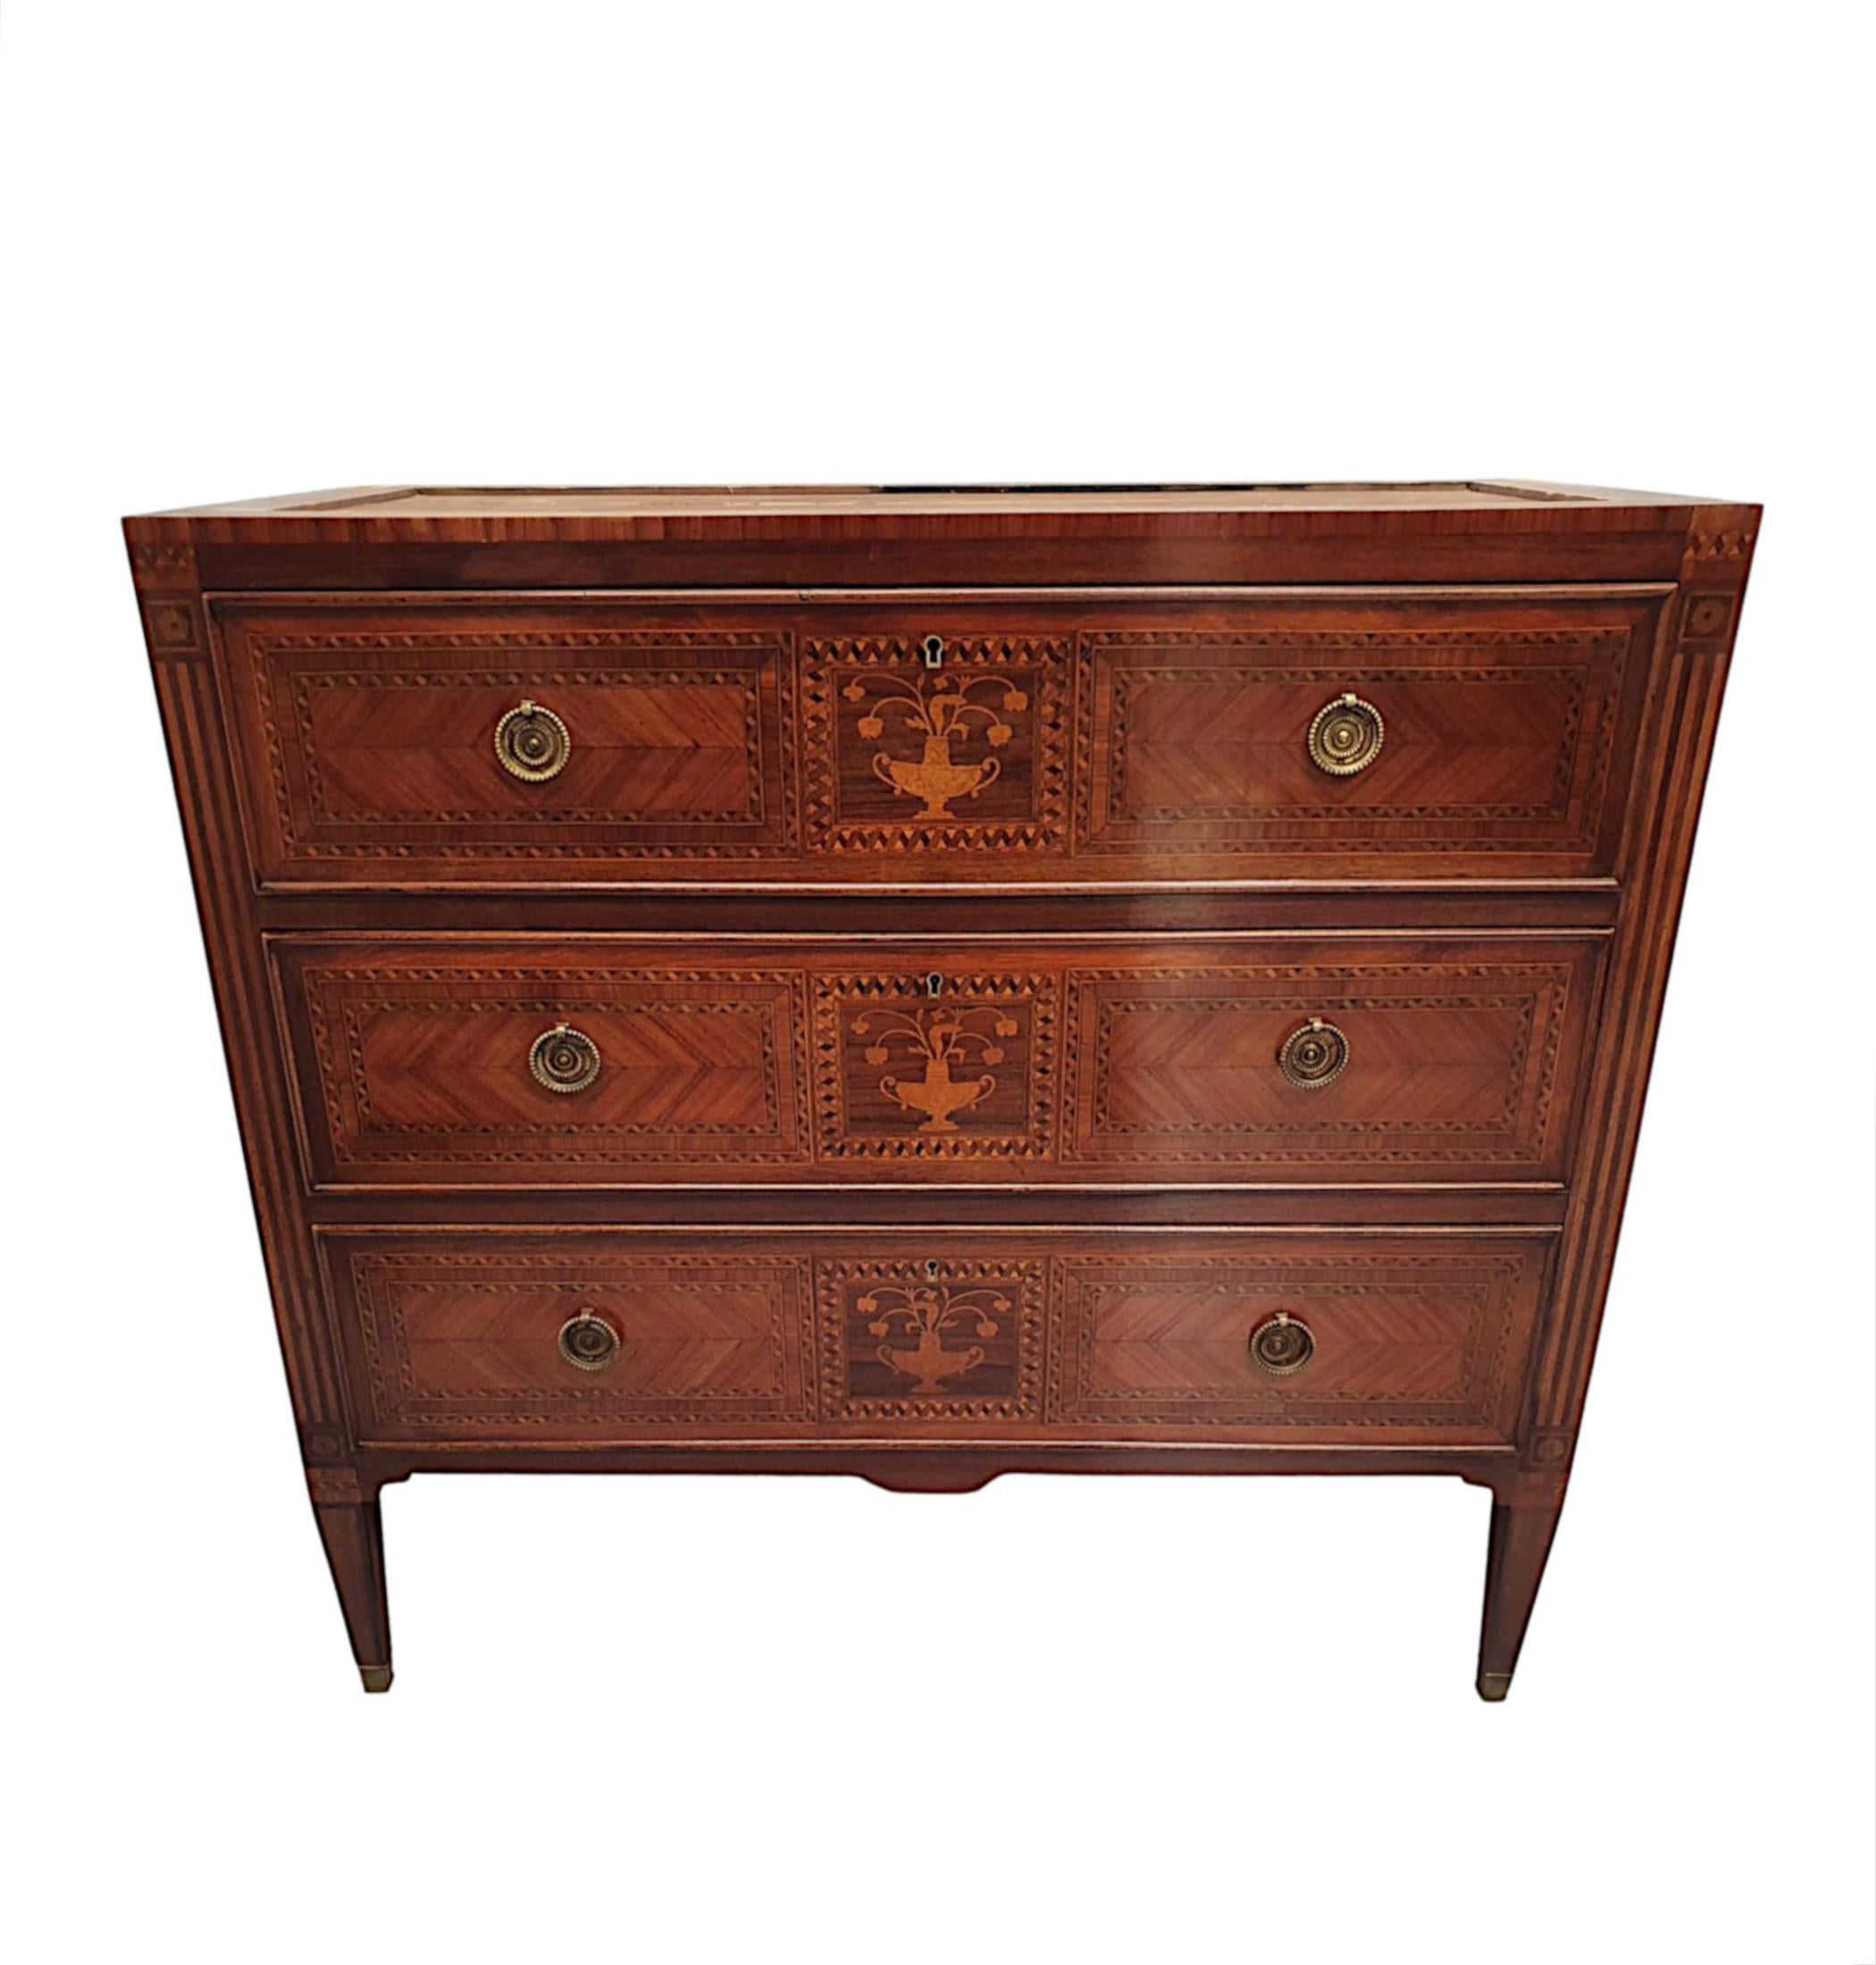 Siena Marble A Fine Early 20th Century Highly Inlaid Marble Top Chest of Drawers For Sale